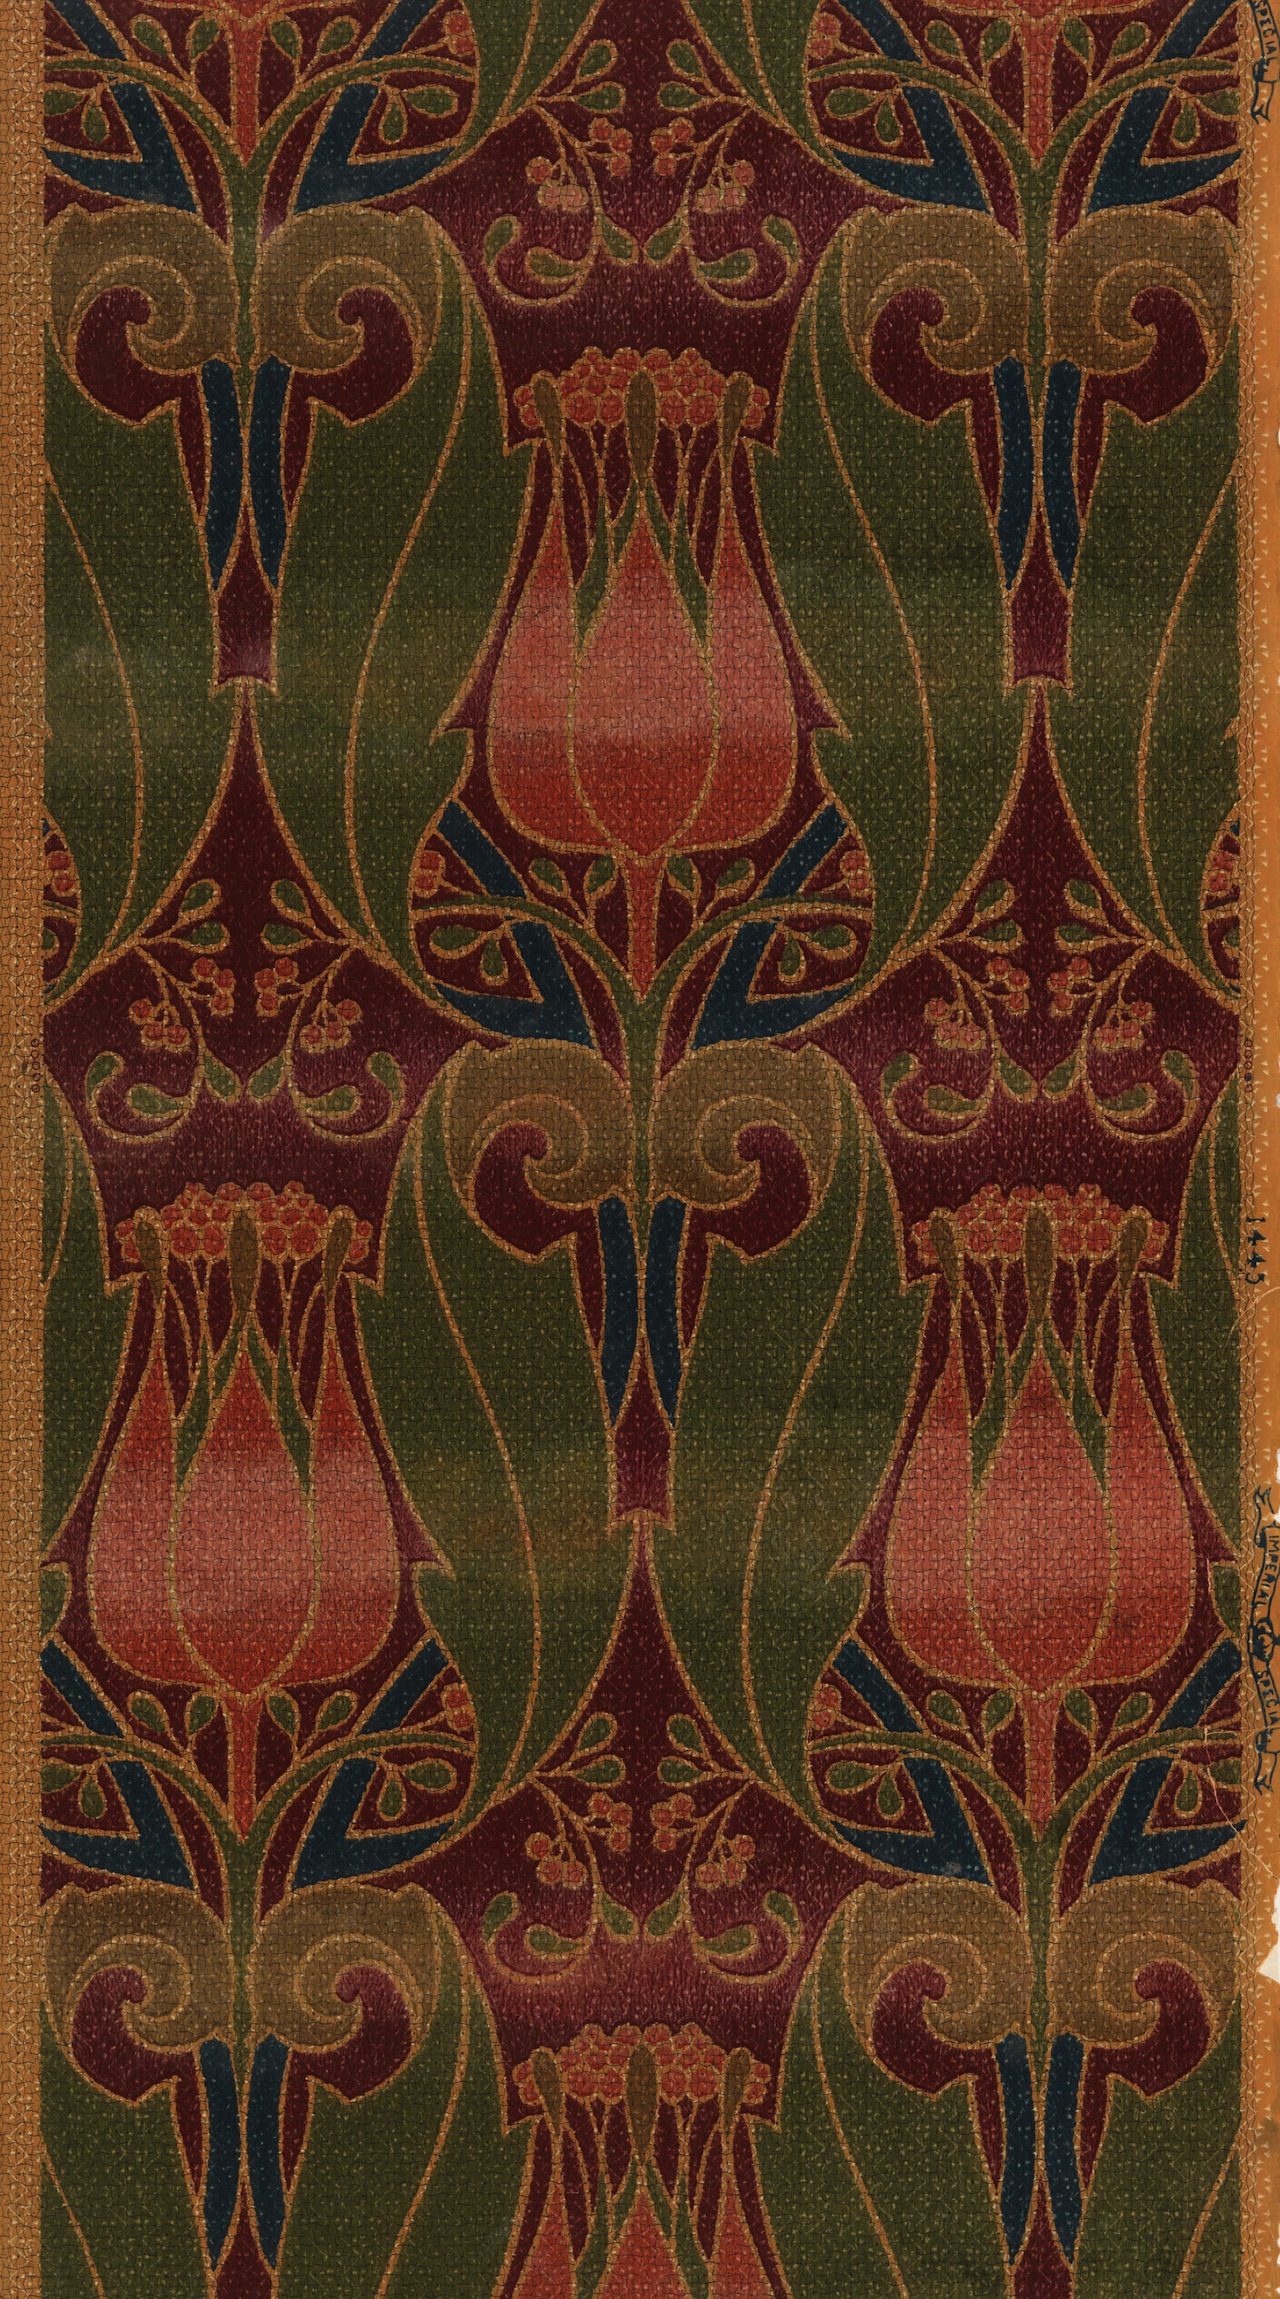 This Art Nouveau Wallpaper Features Tulips And Foliate Scrolls It Was